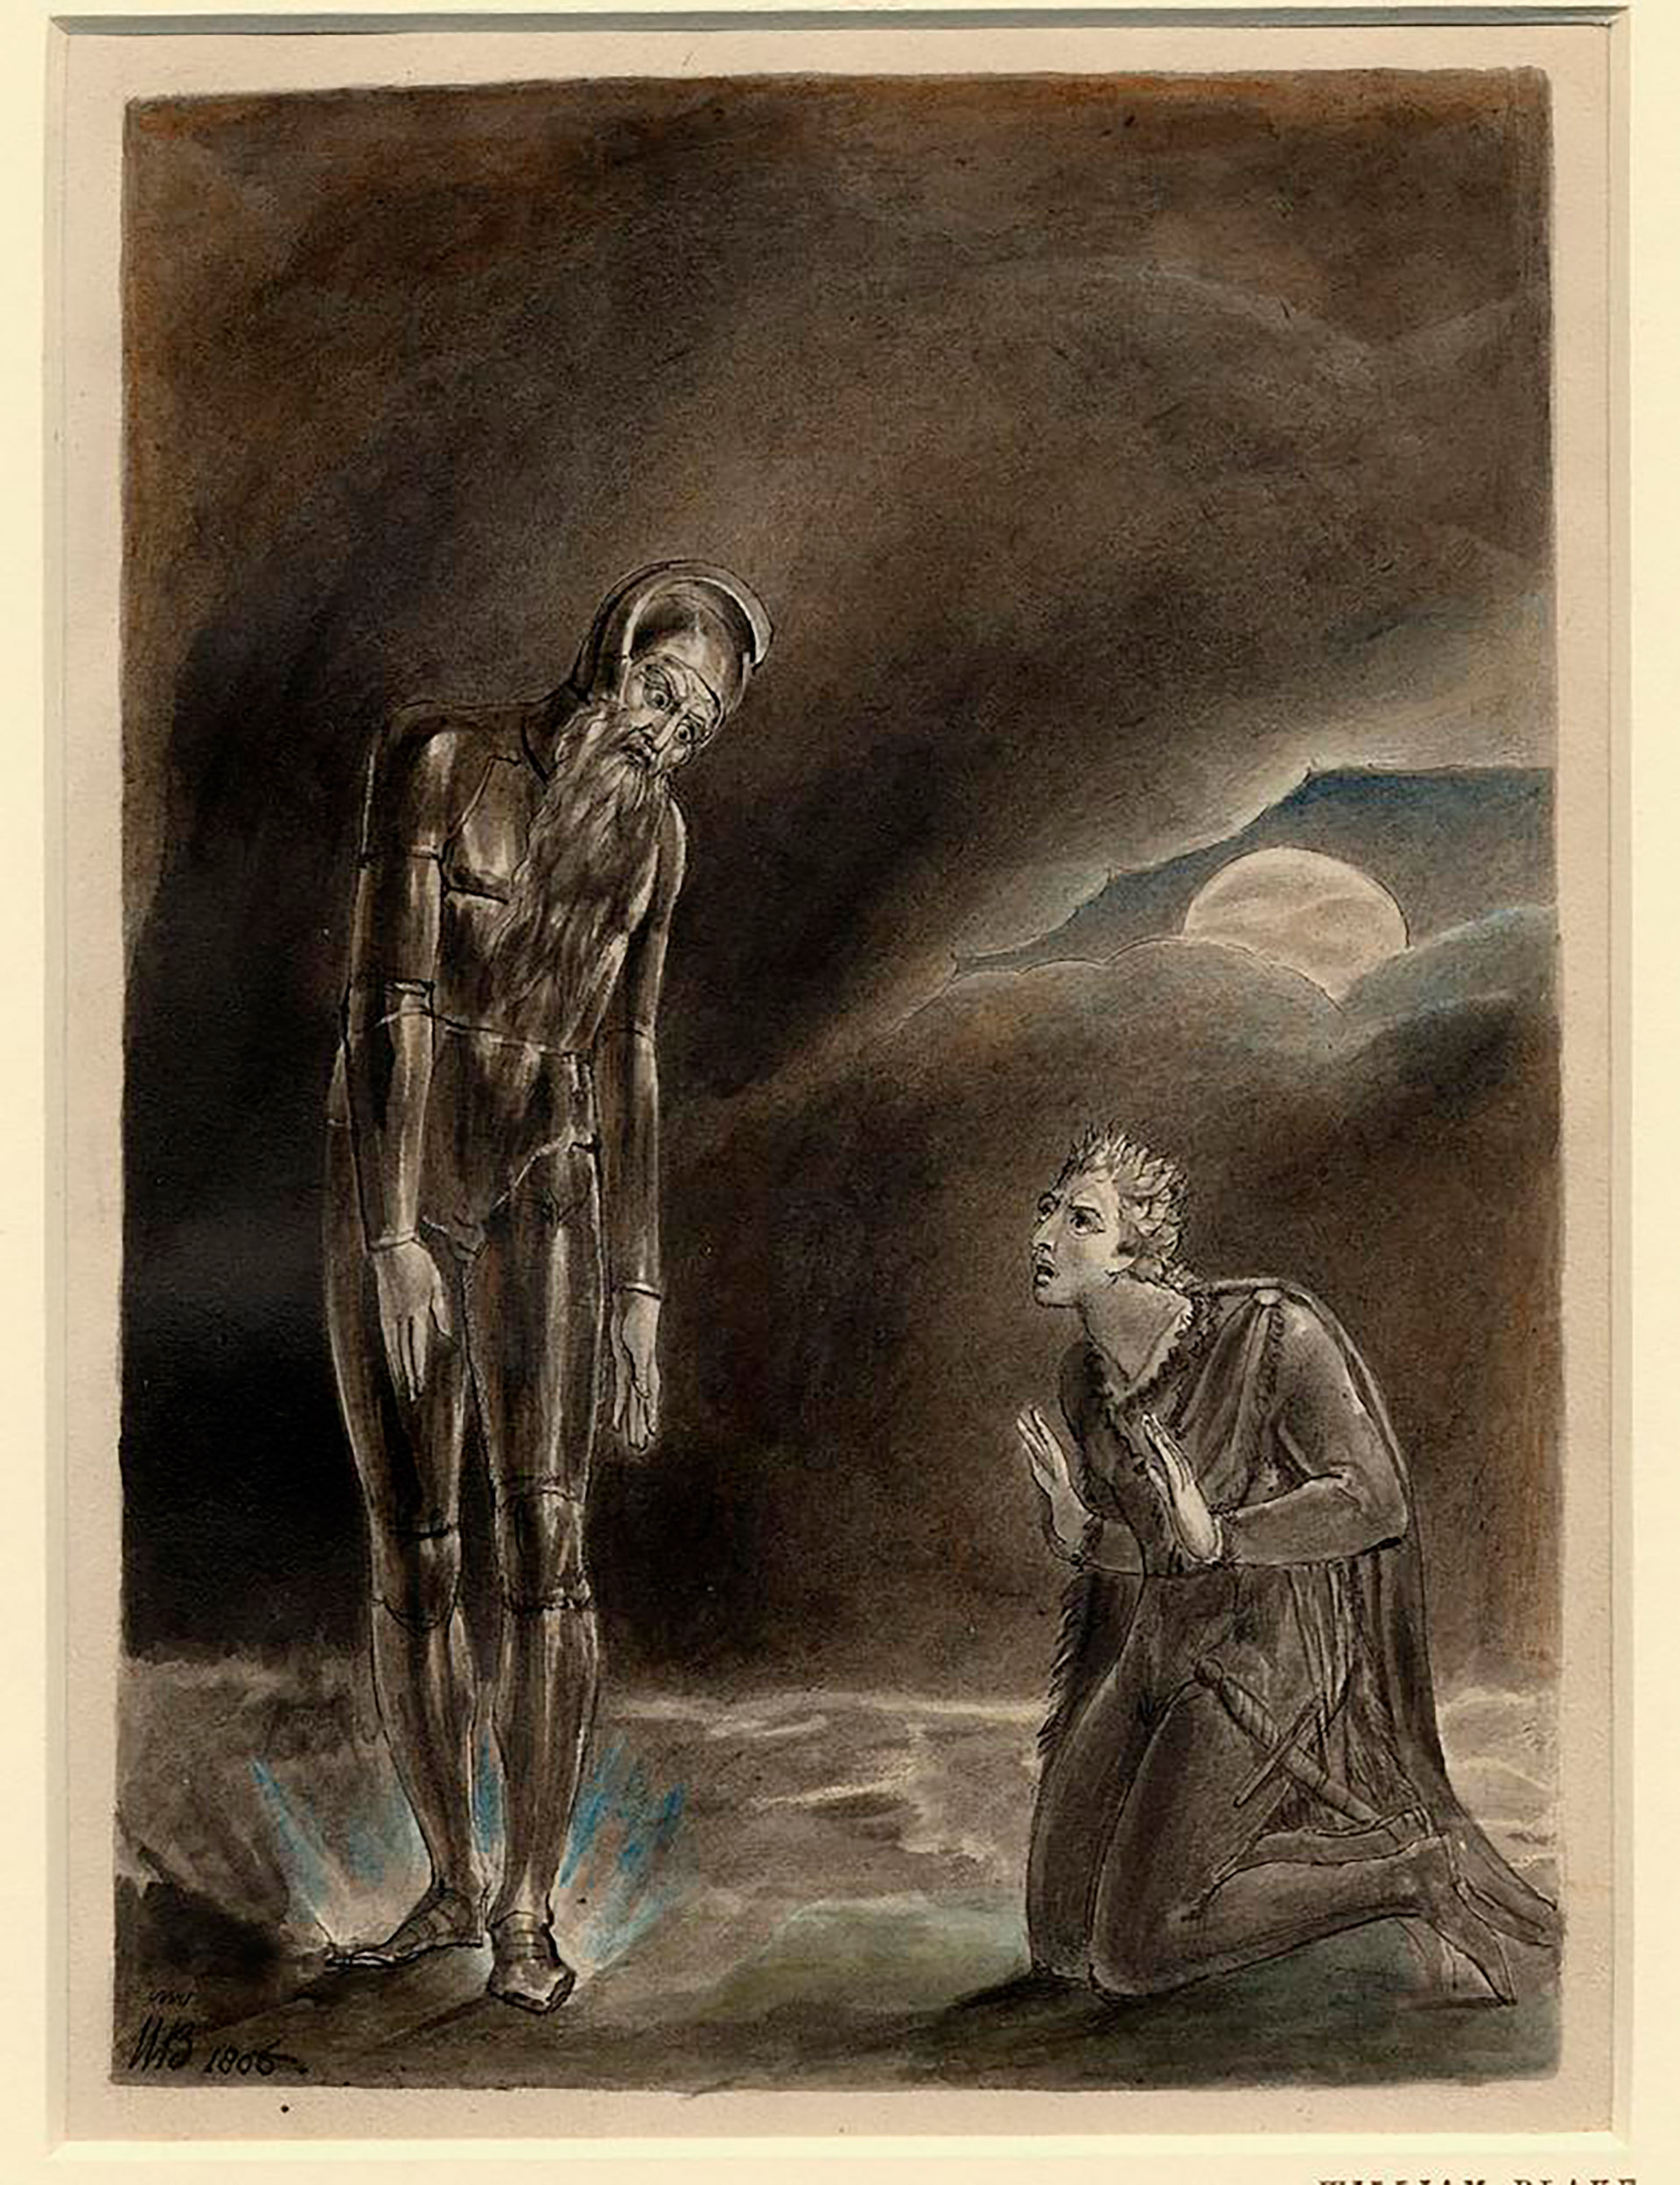 Hamlet and the Ghost of his Father, William Blake, 1806. British Museum